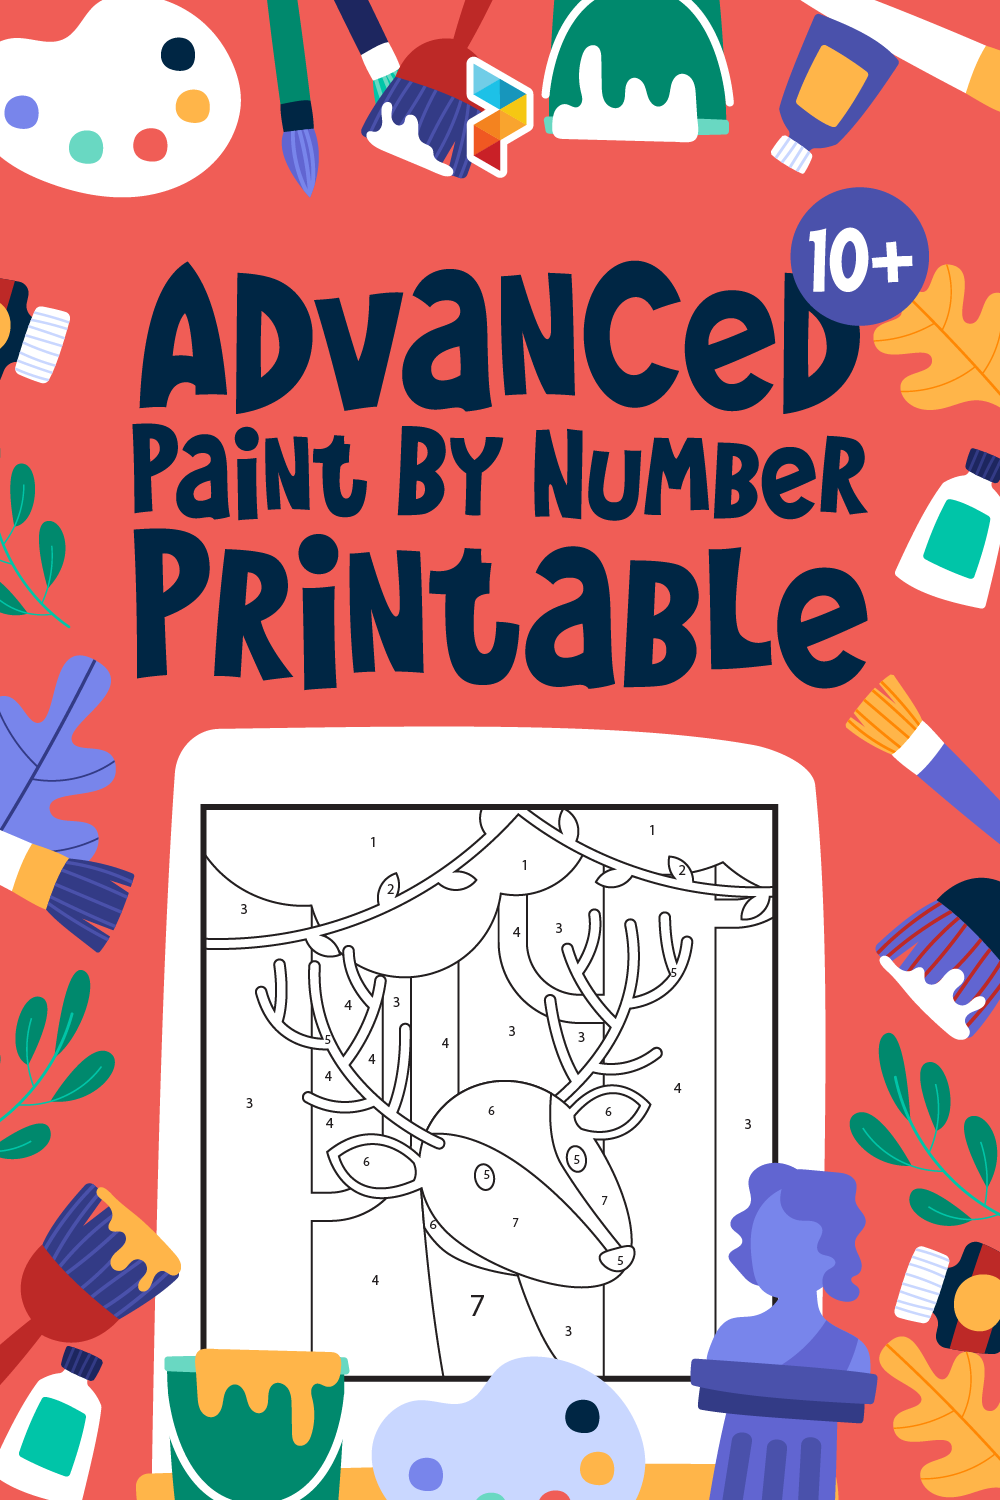 Advanced Paint By Number Printable